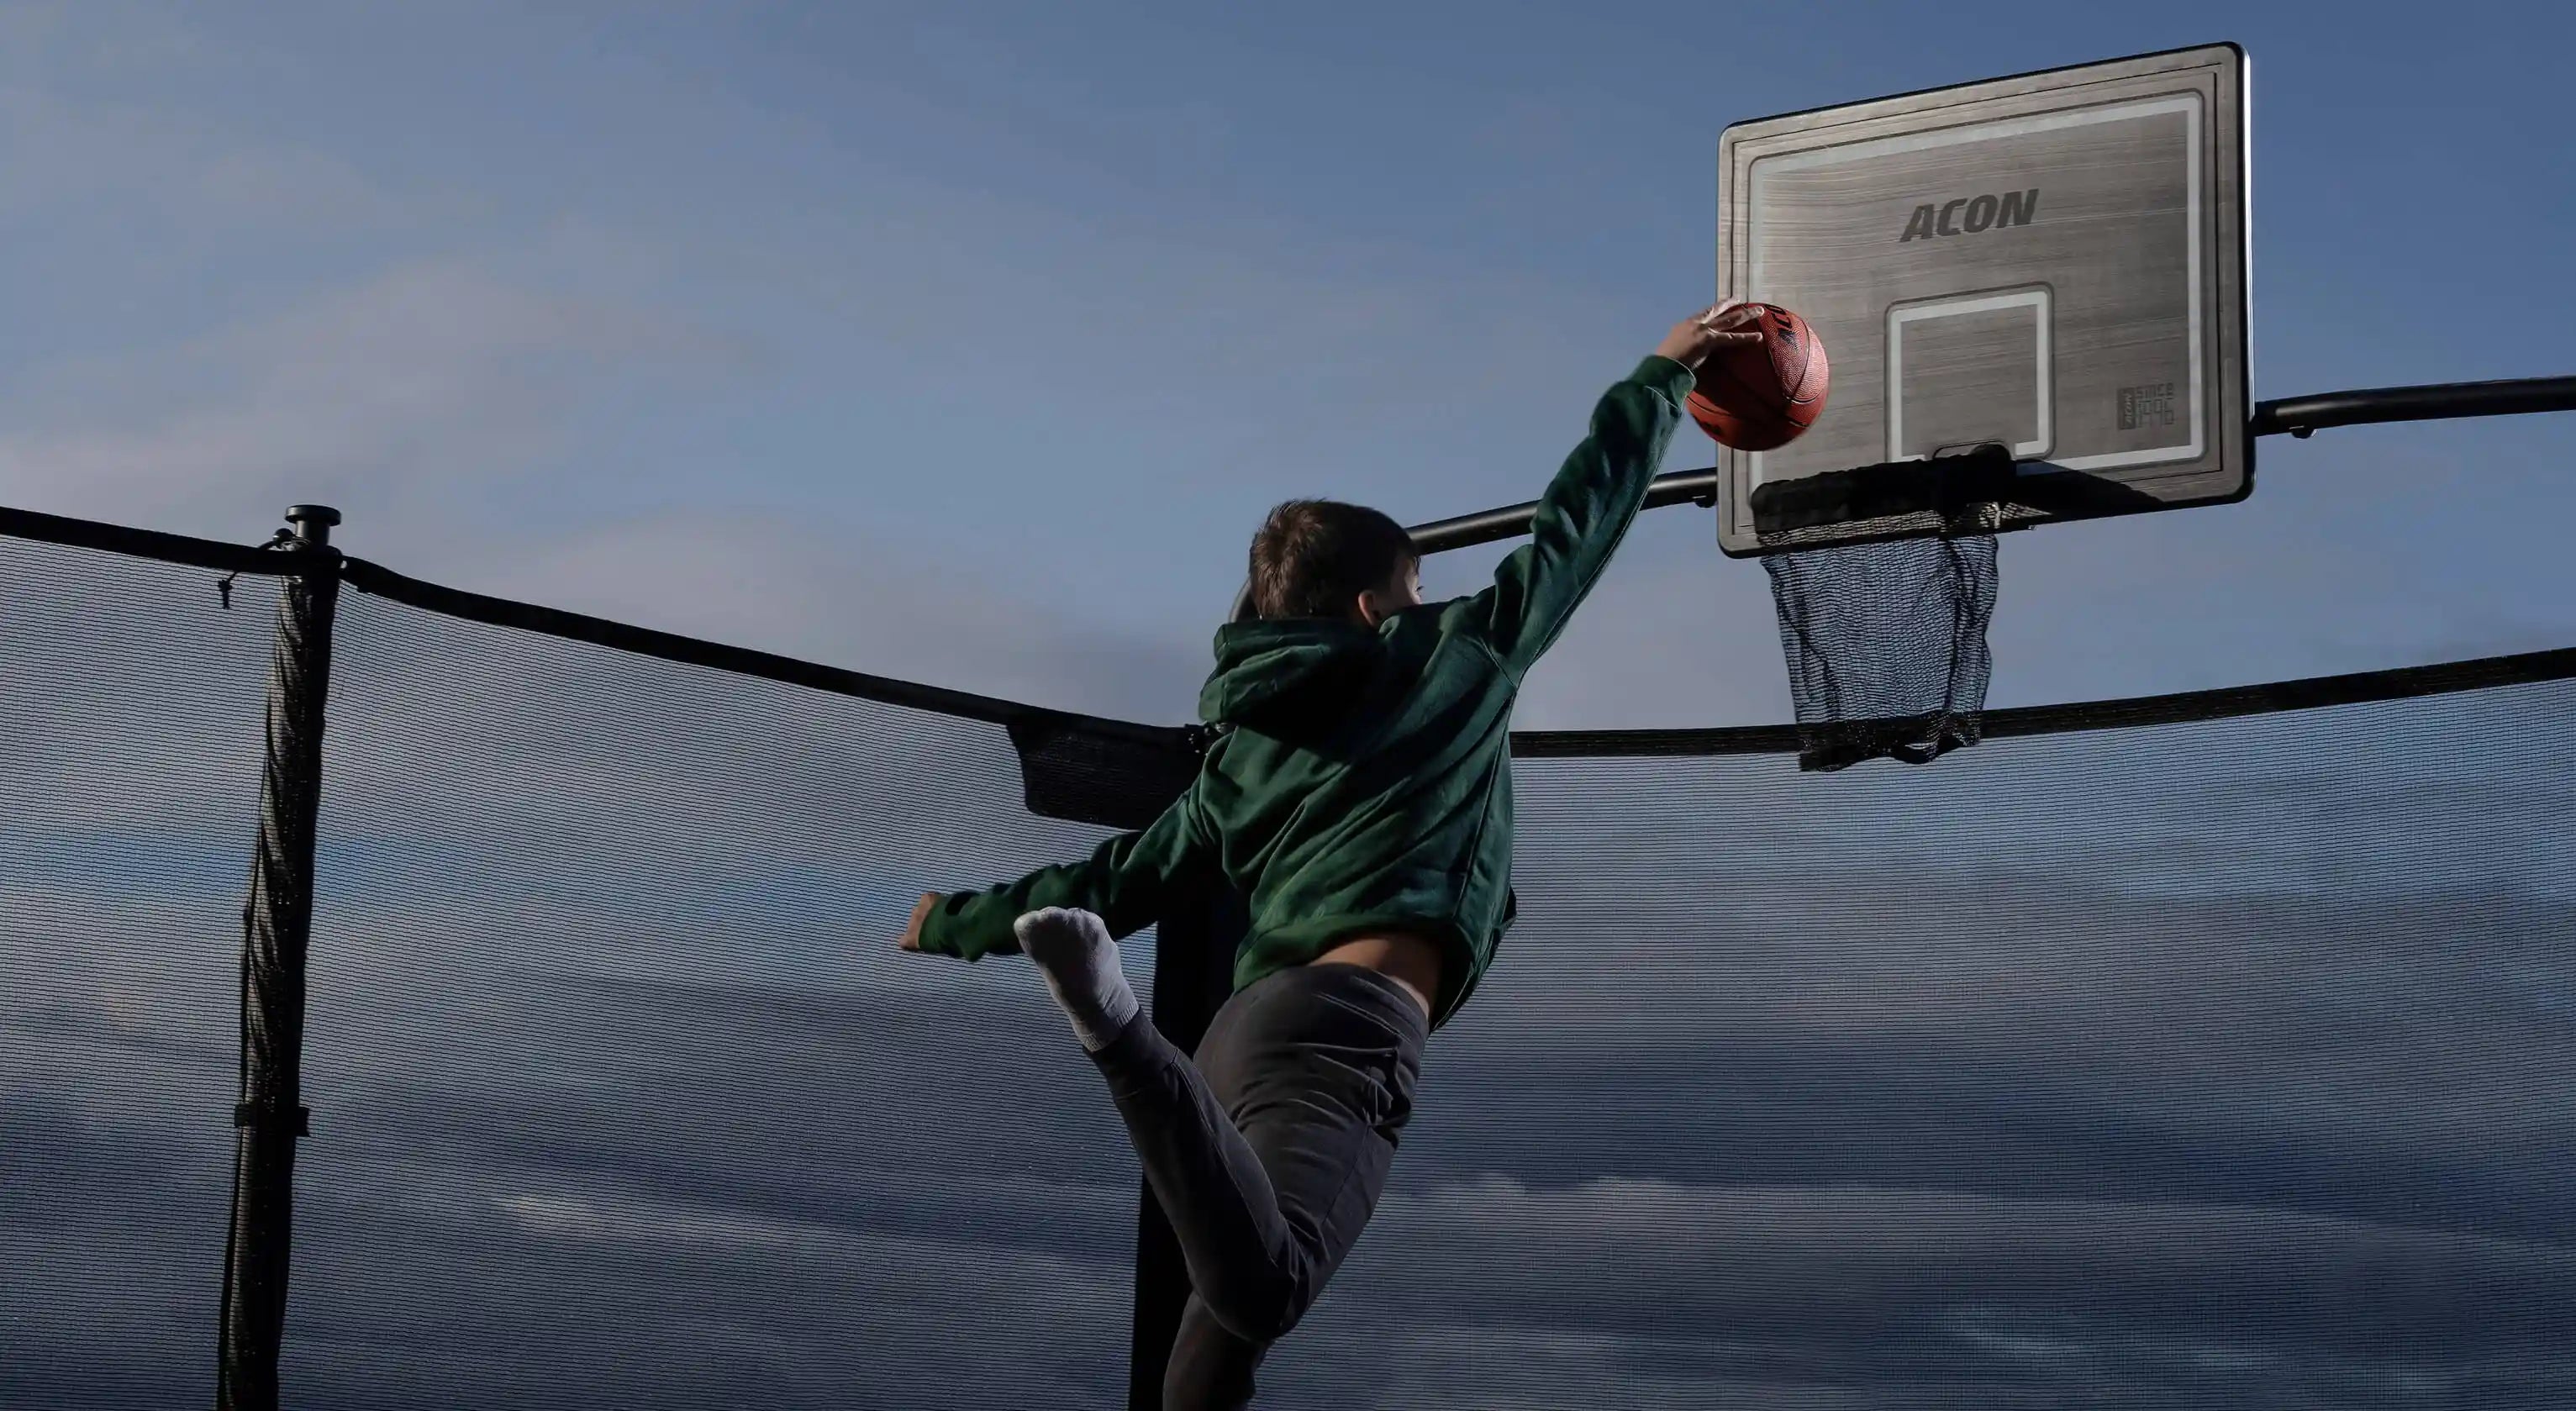 A boy throws a basketball into the basketball hoop of the trampoline.